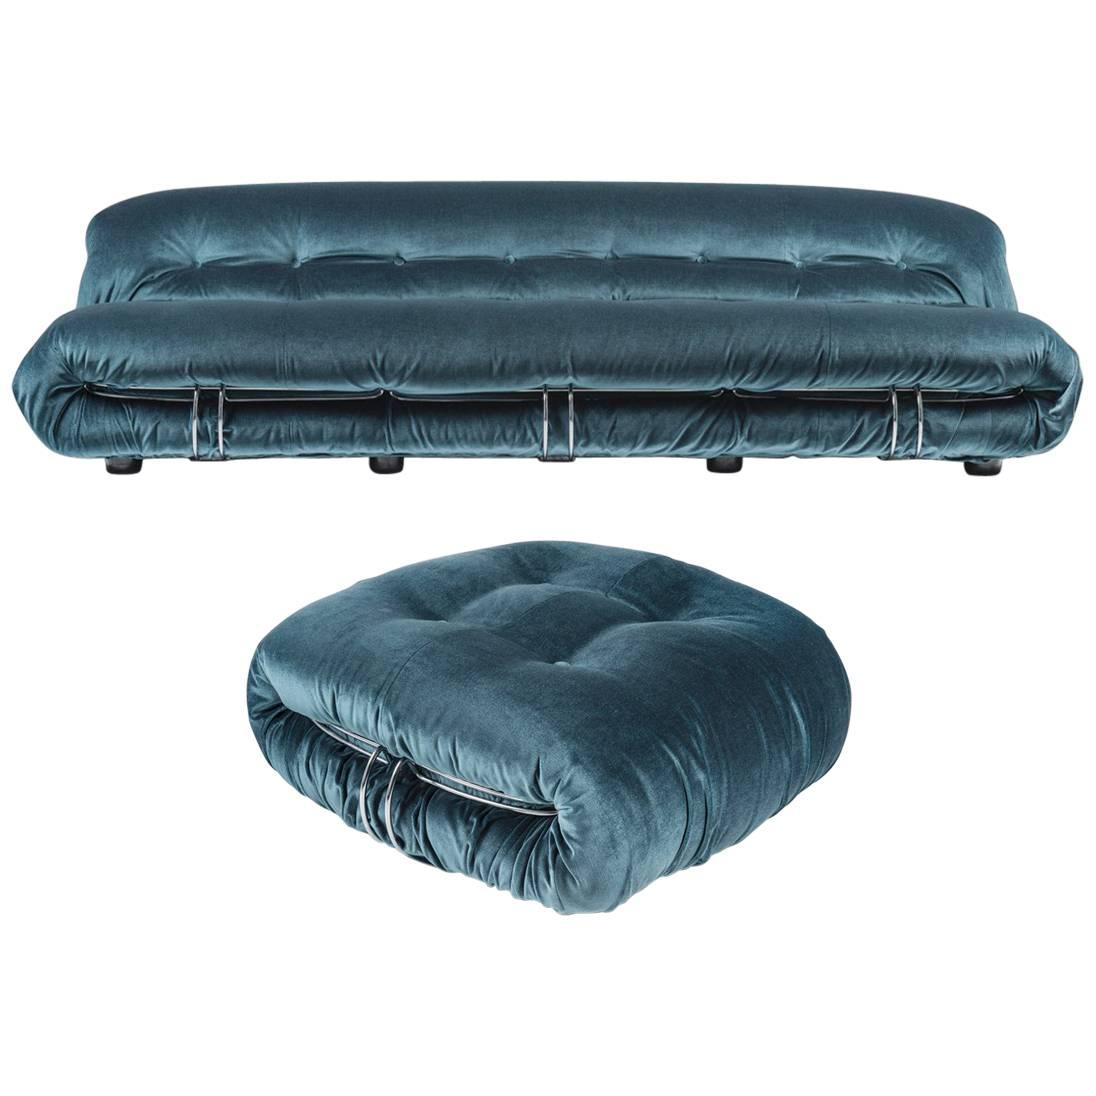 Sofa and Ottoman in Blue Velvet "Soriana" by Tobia Scarpa for Cassina